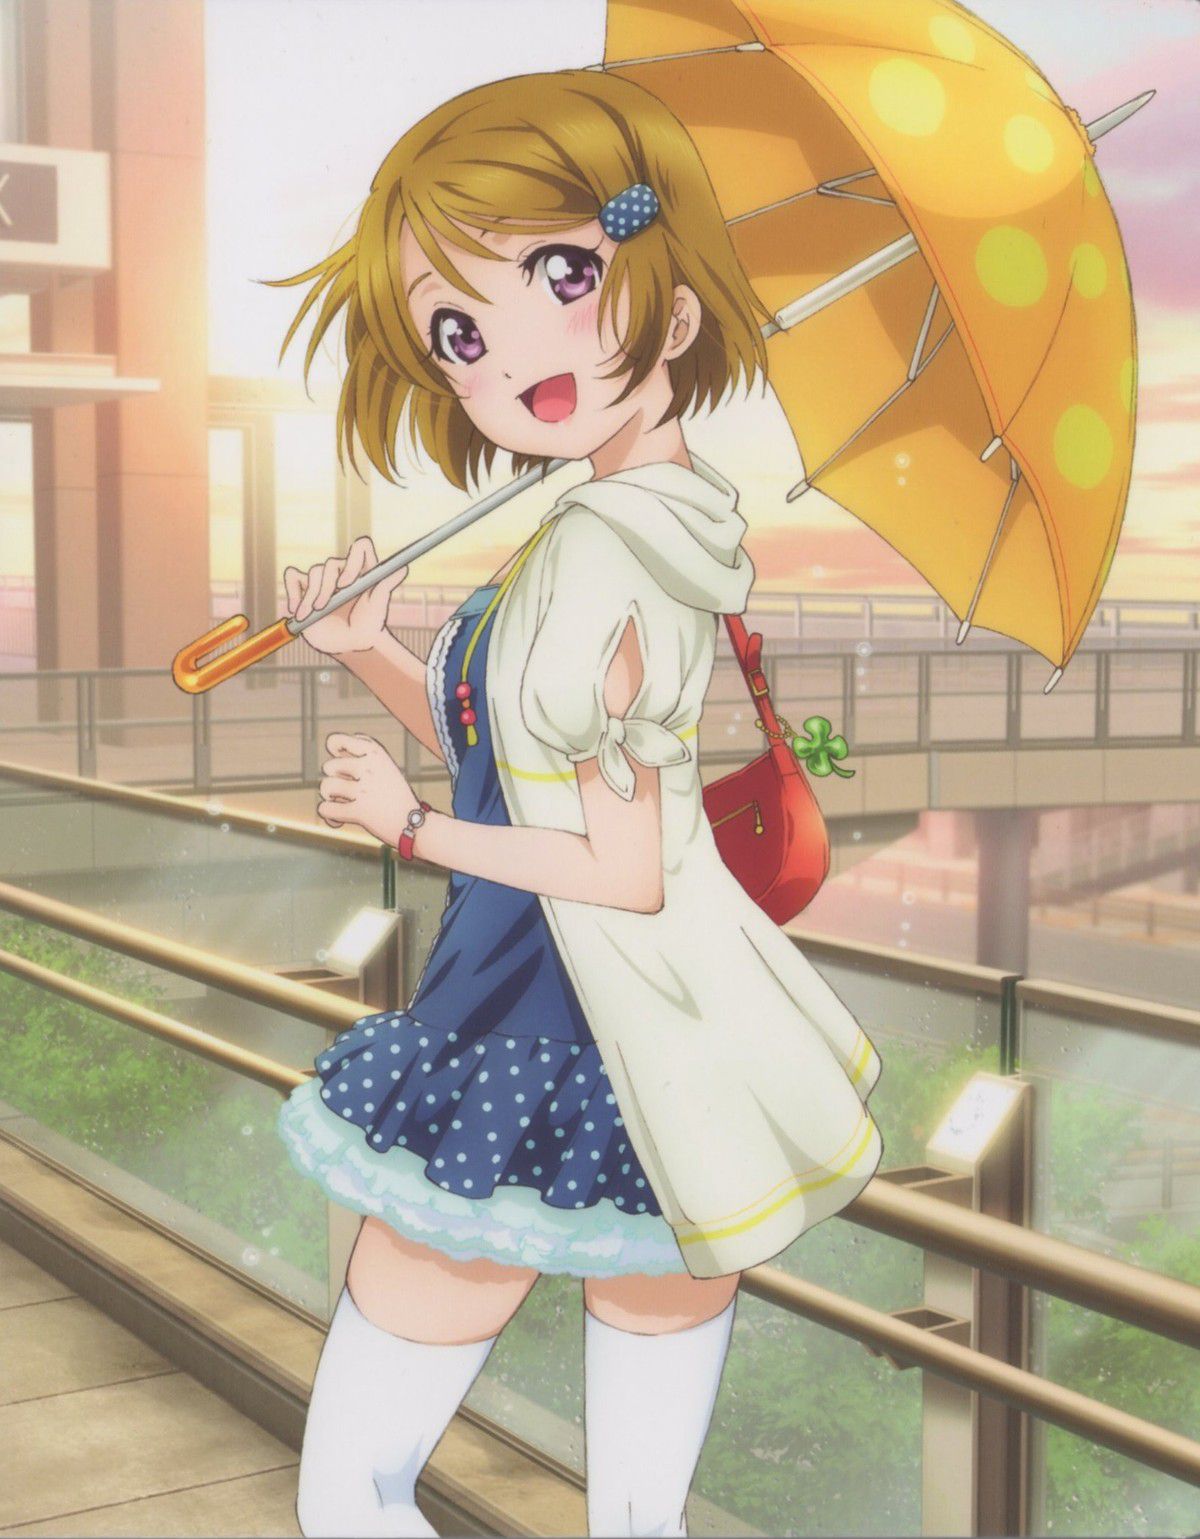 [Image is: "love live! "The girls Anime industry's leading erotic nomecha. body you're a www 3